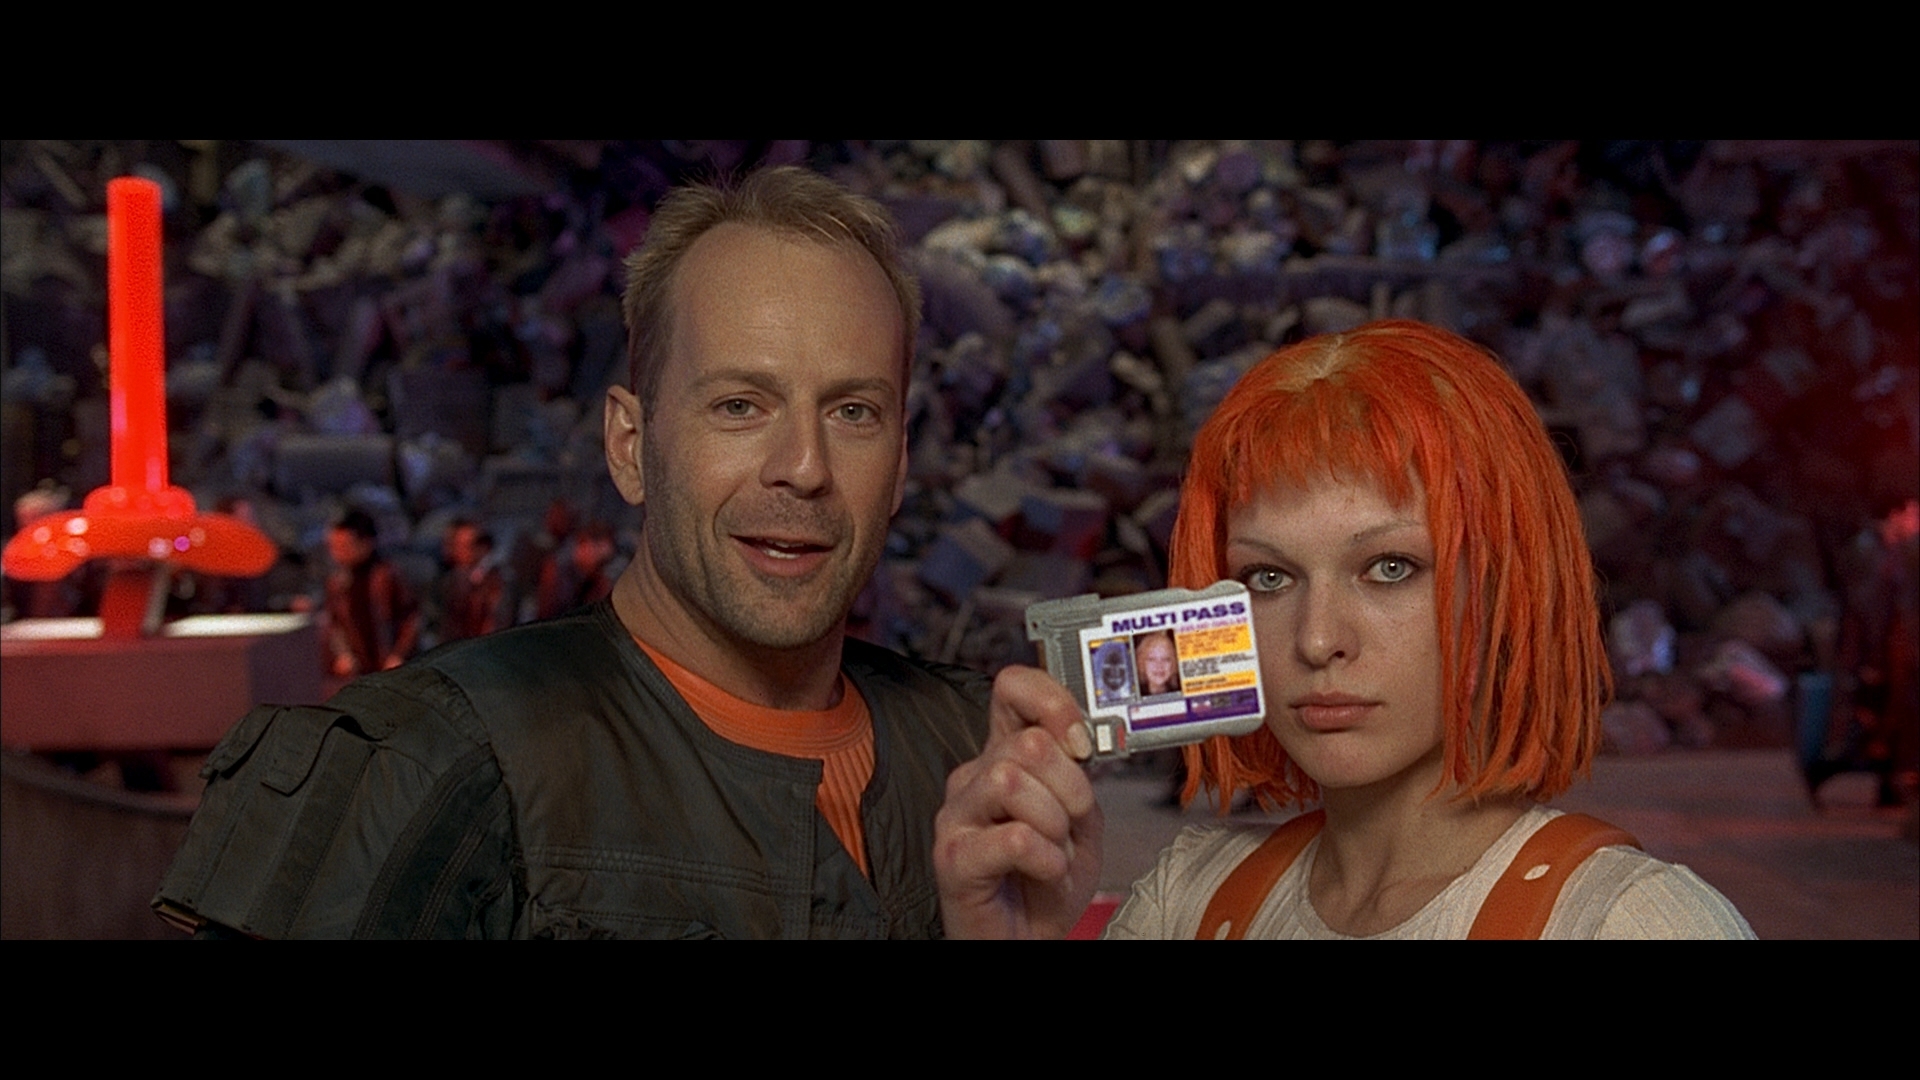 the fifth element full movie free download